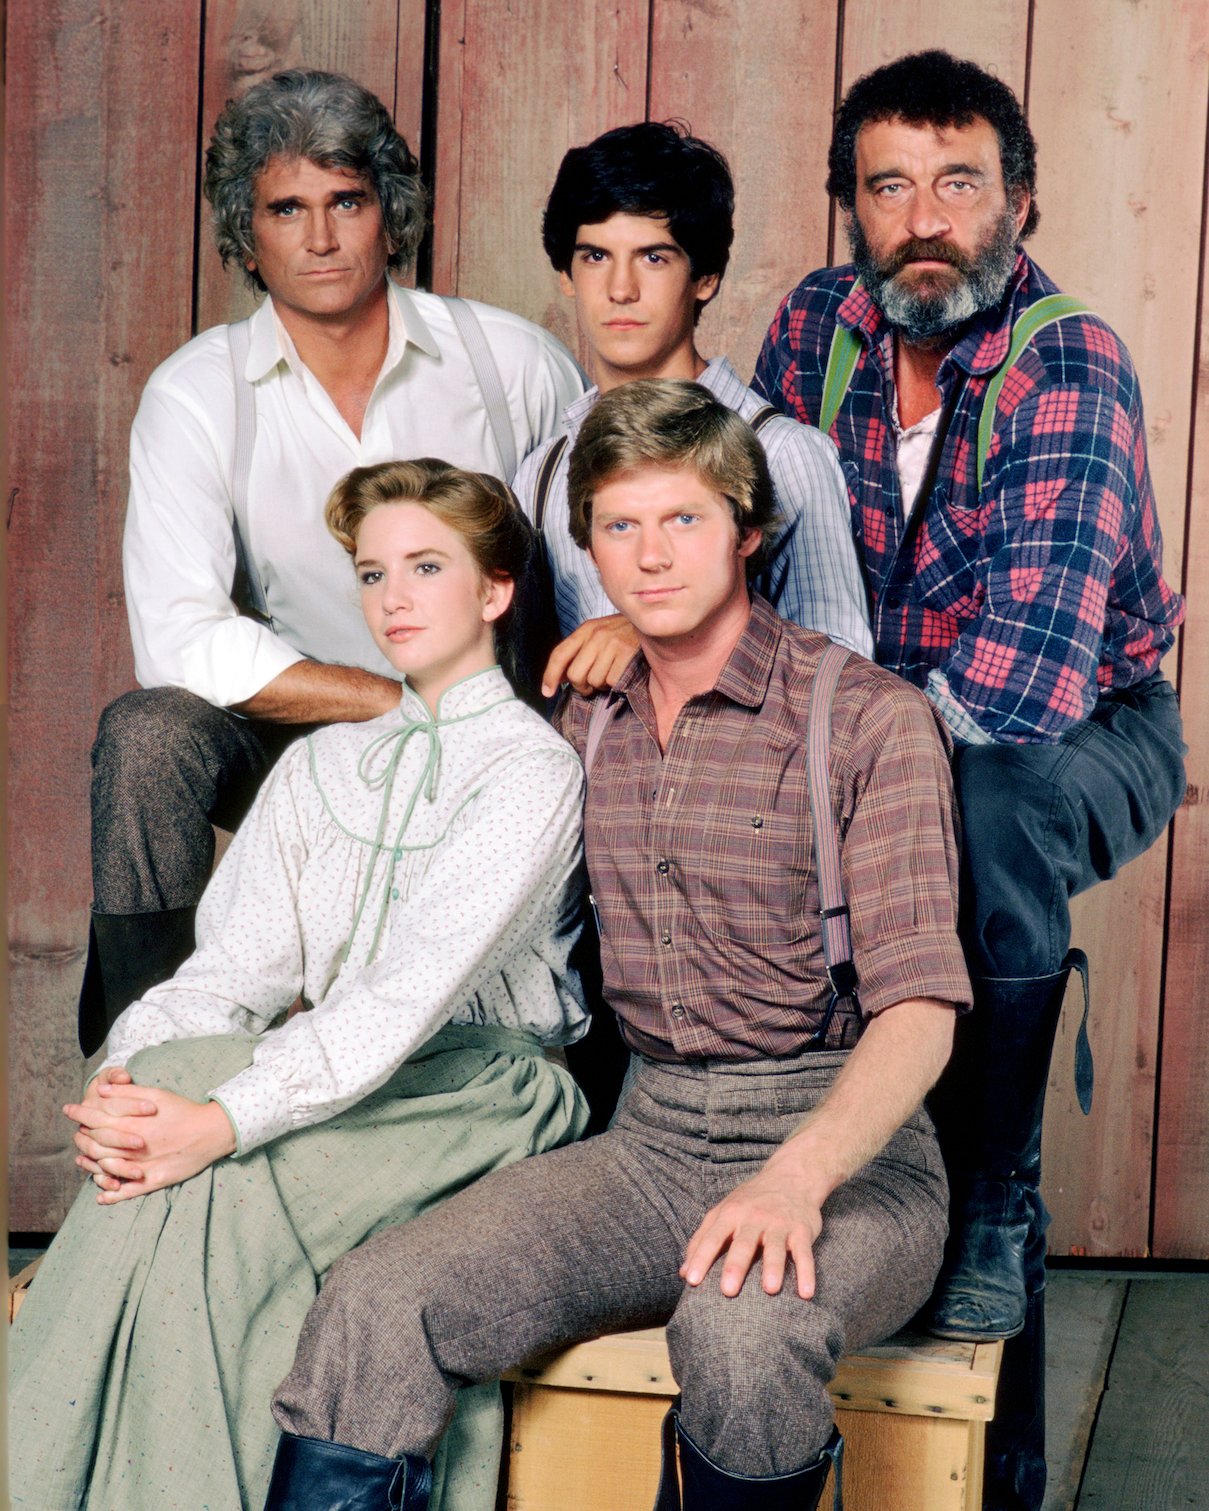 The cast of 'Little House on the Prairie' circa 1980